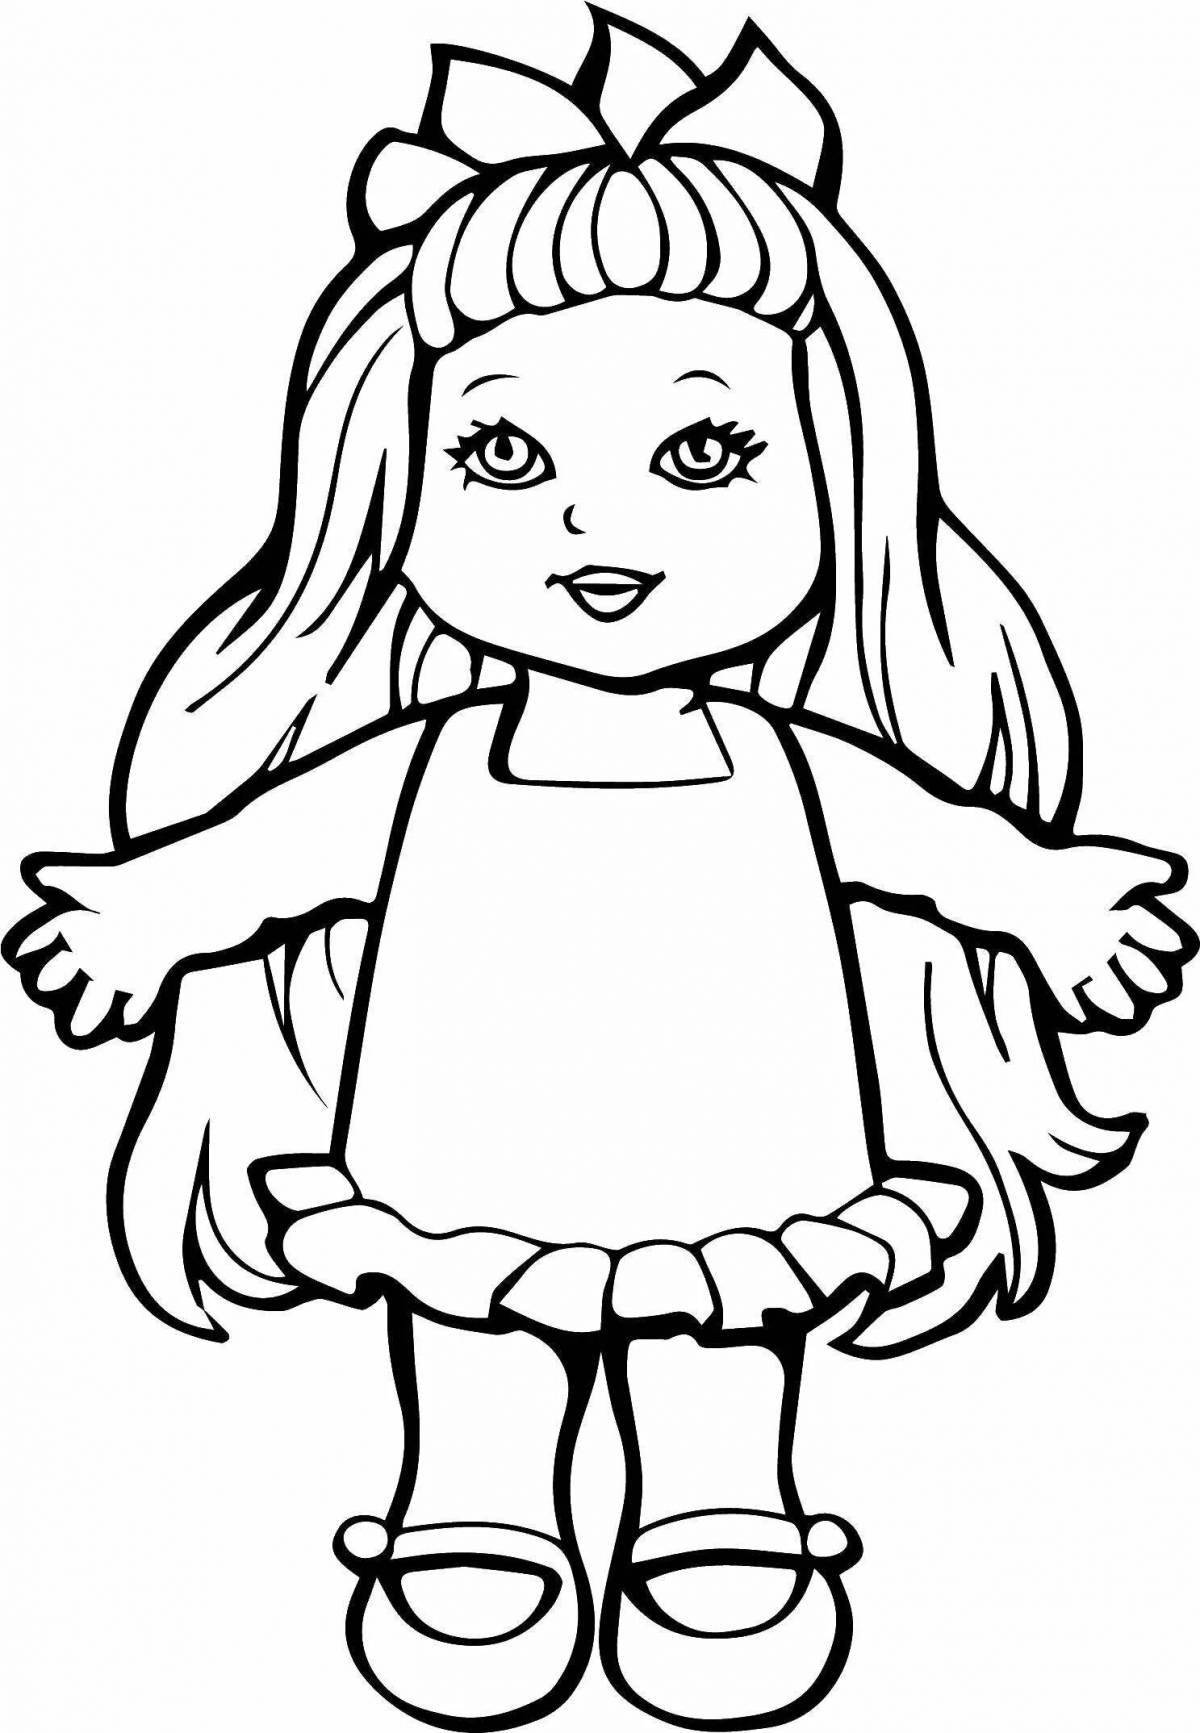 Coloring page dazzling dolly